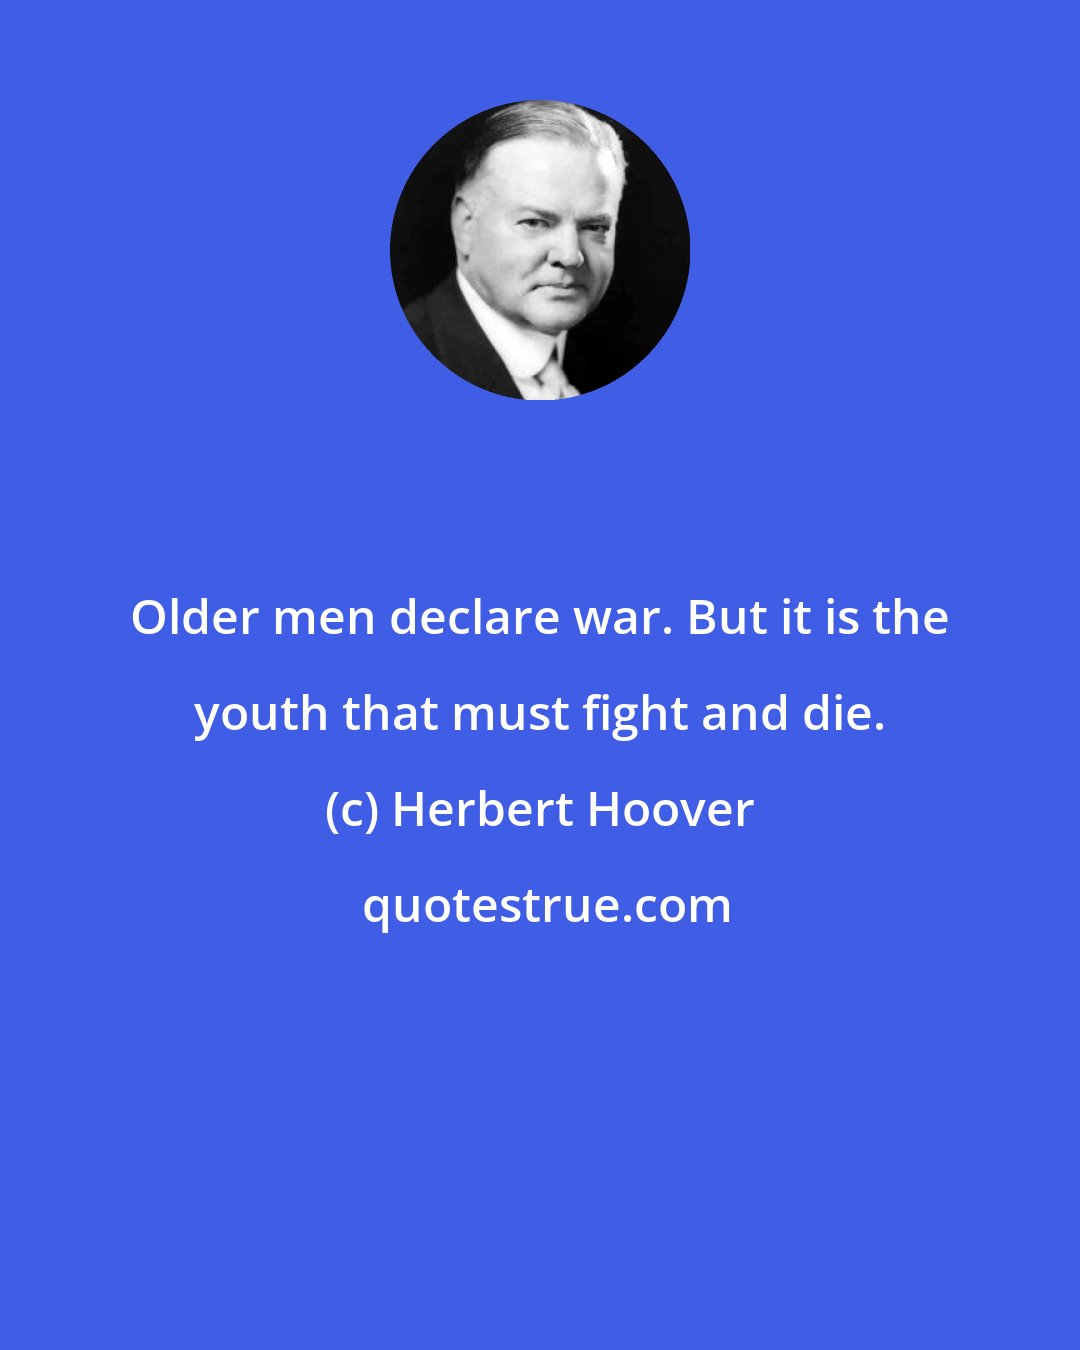 Herbert Hoover: Older men declare war. But it is the youth that must fight and die.